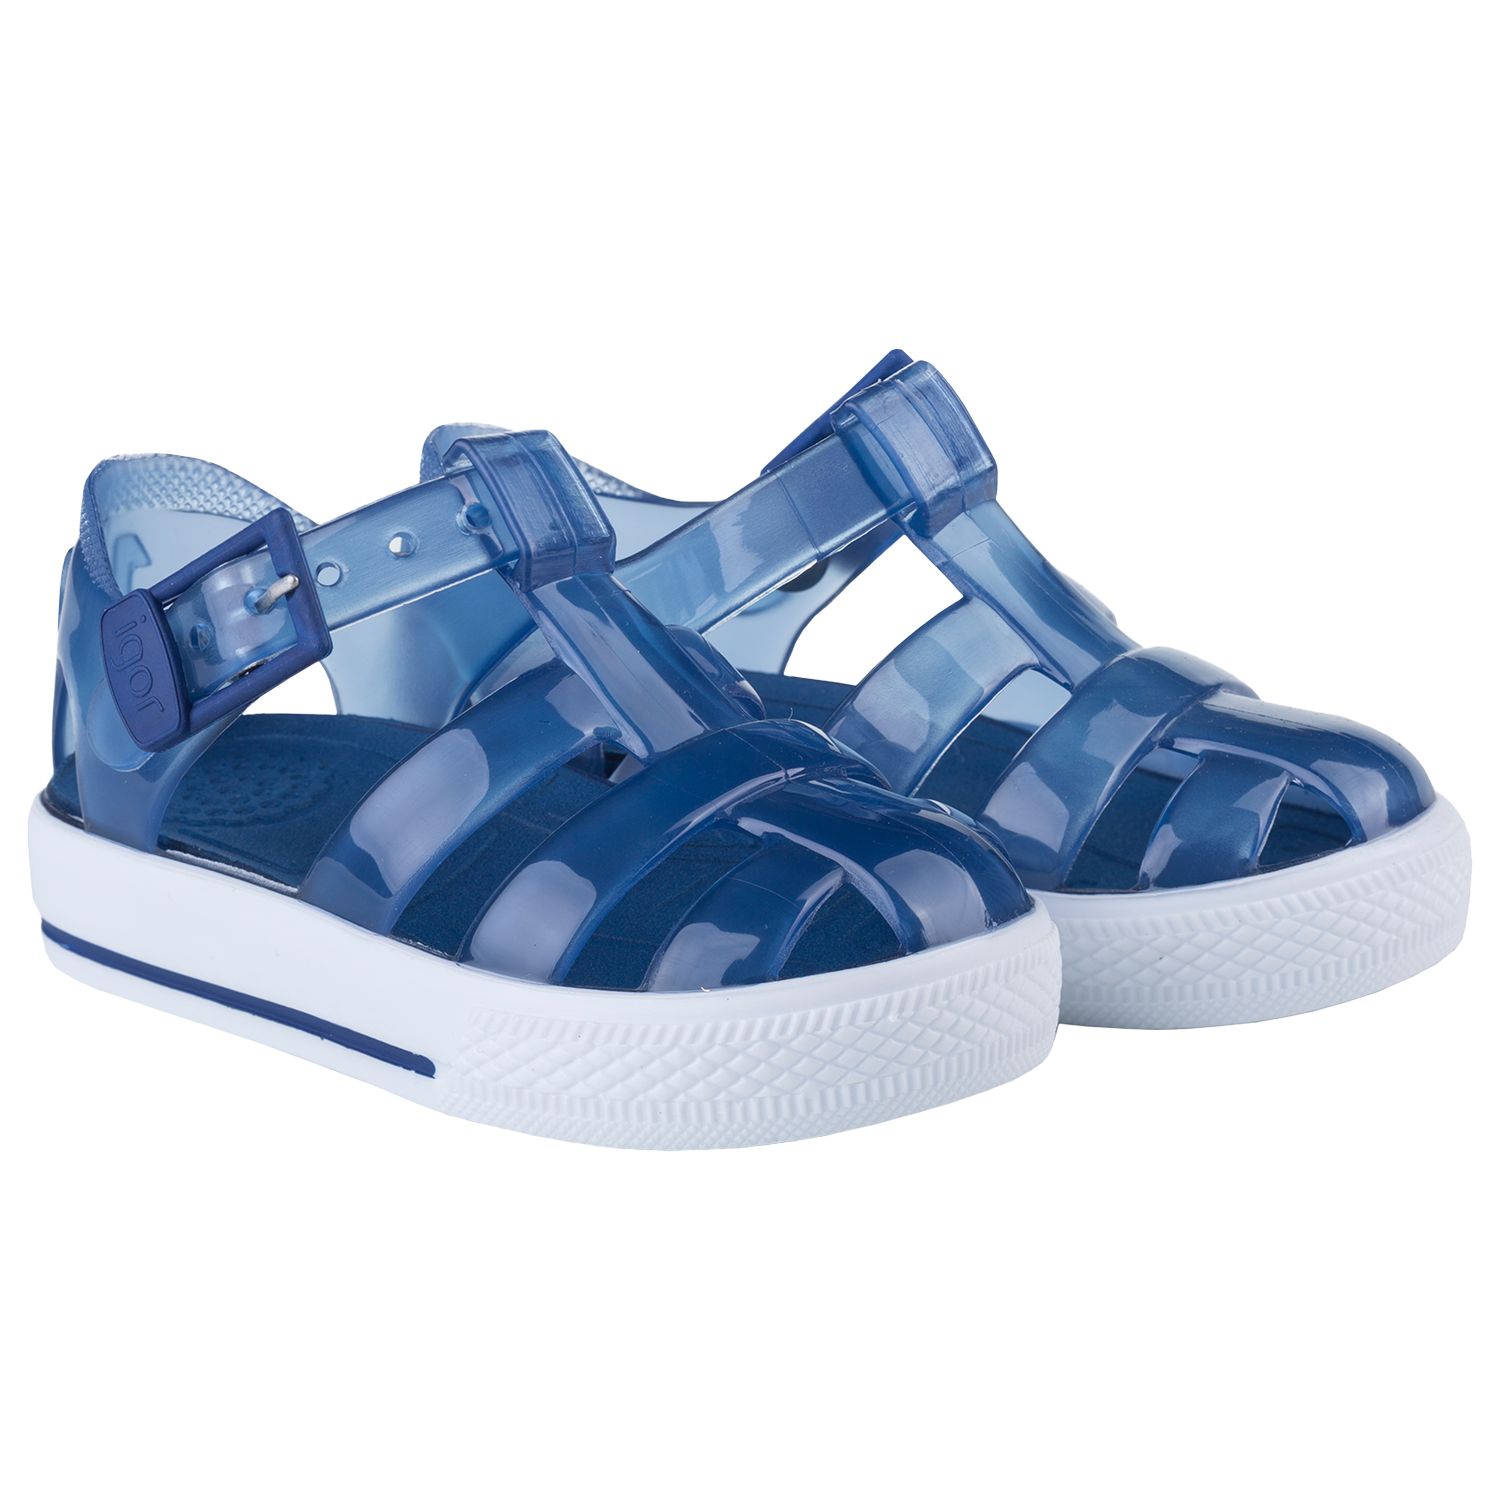 IGOR Children's Tenis Jelly Shoes, Navy at John Lewis & Partners